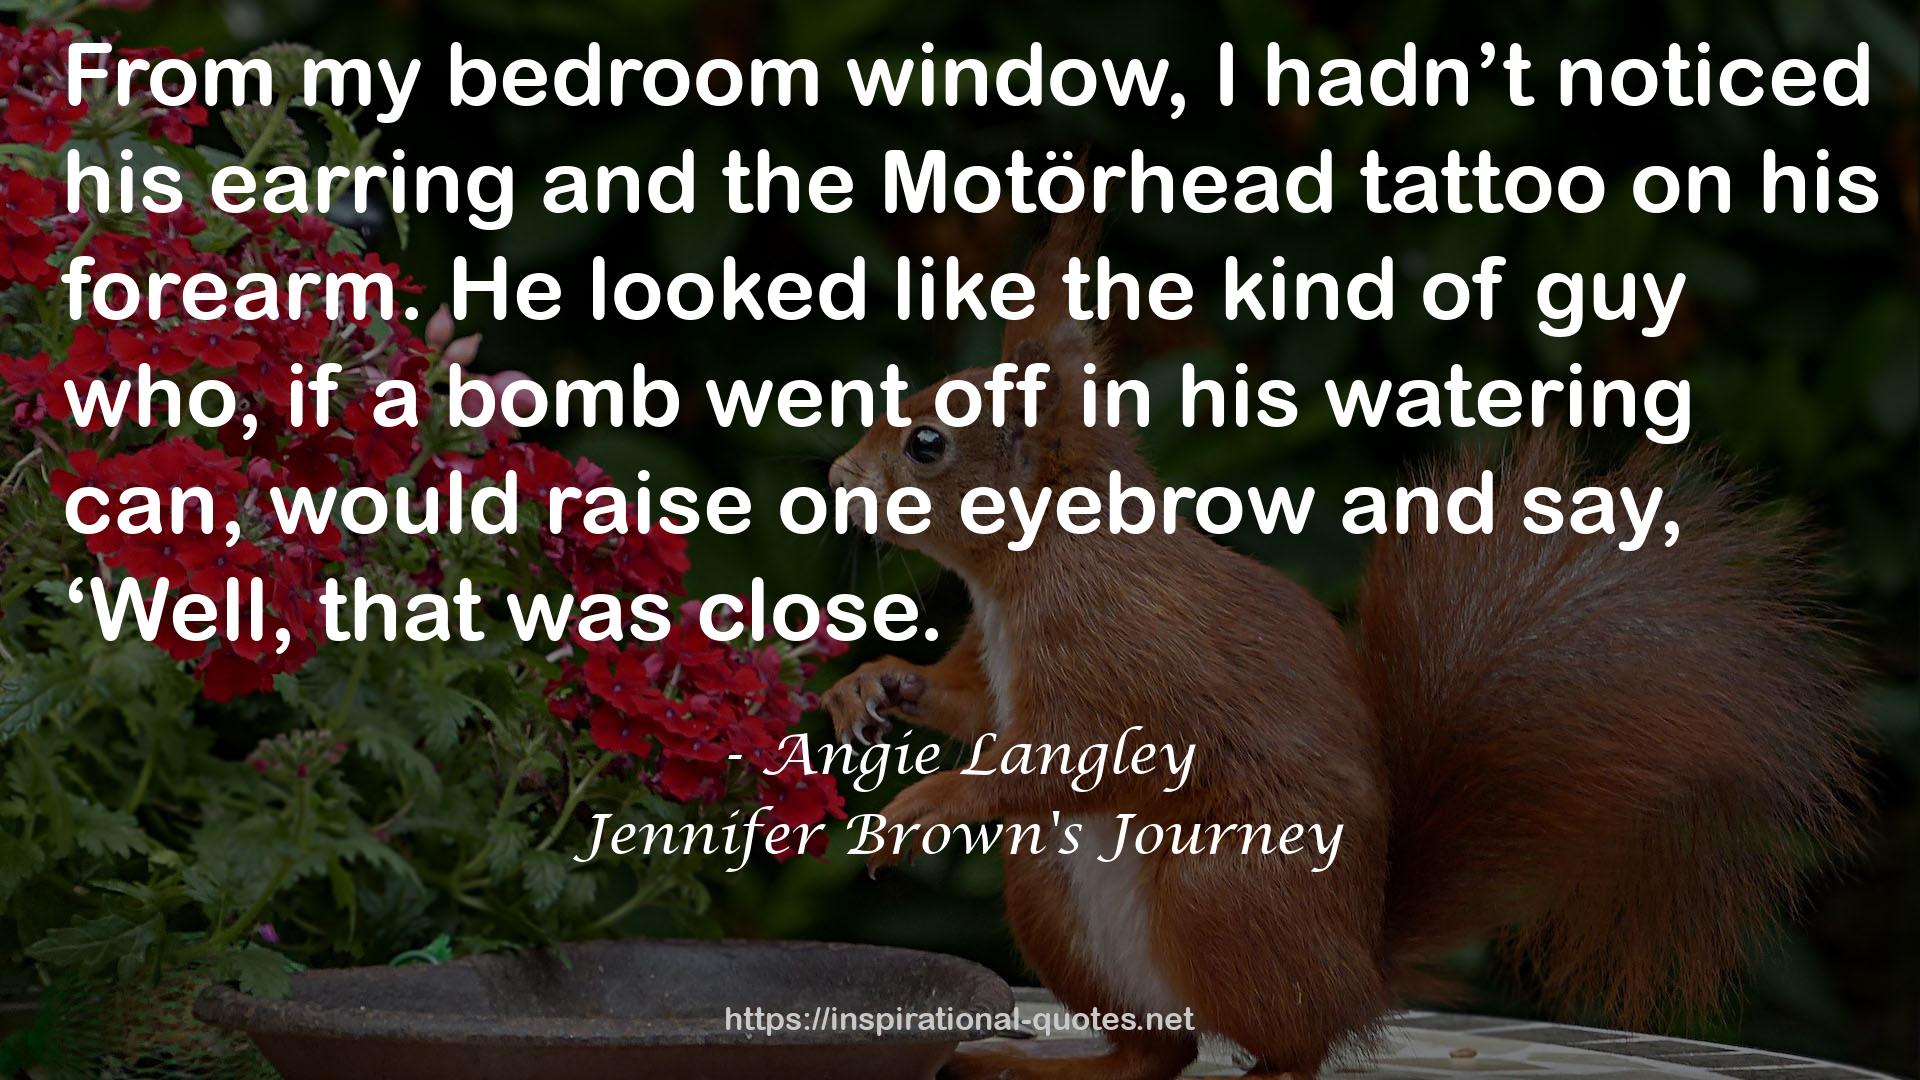 Jennifer Brown's Journey QUOTES